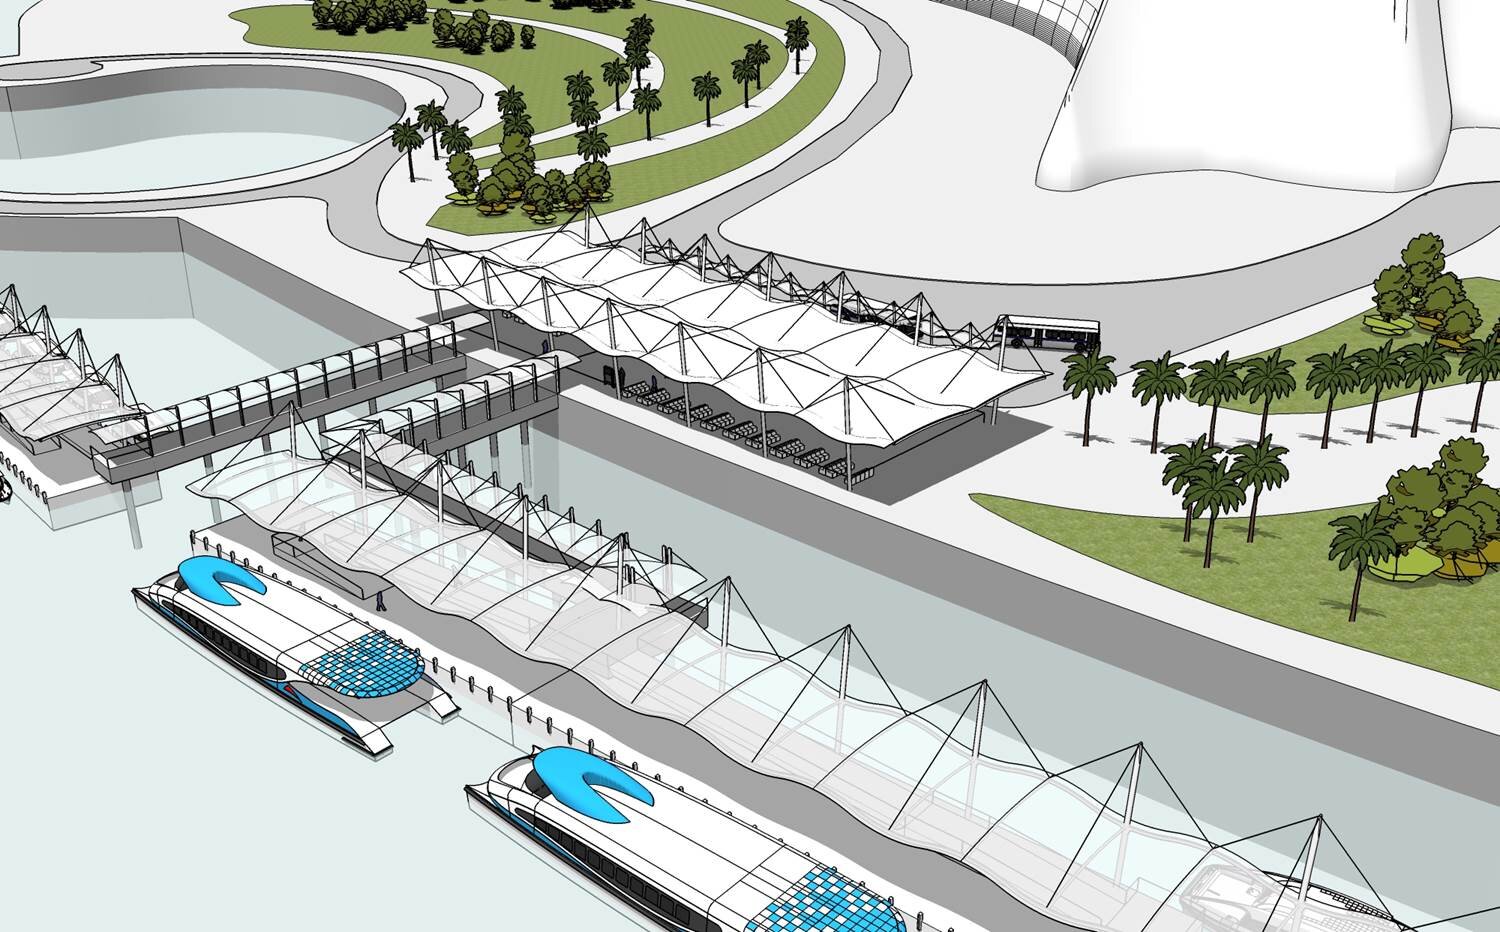 View of the 3D model of a proposed water transport station